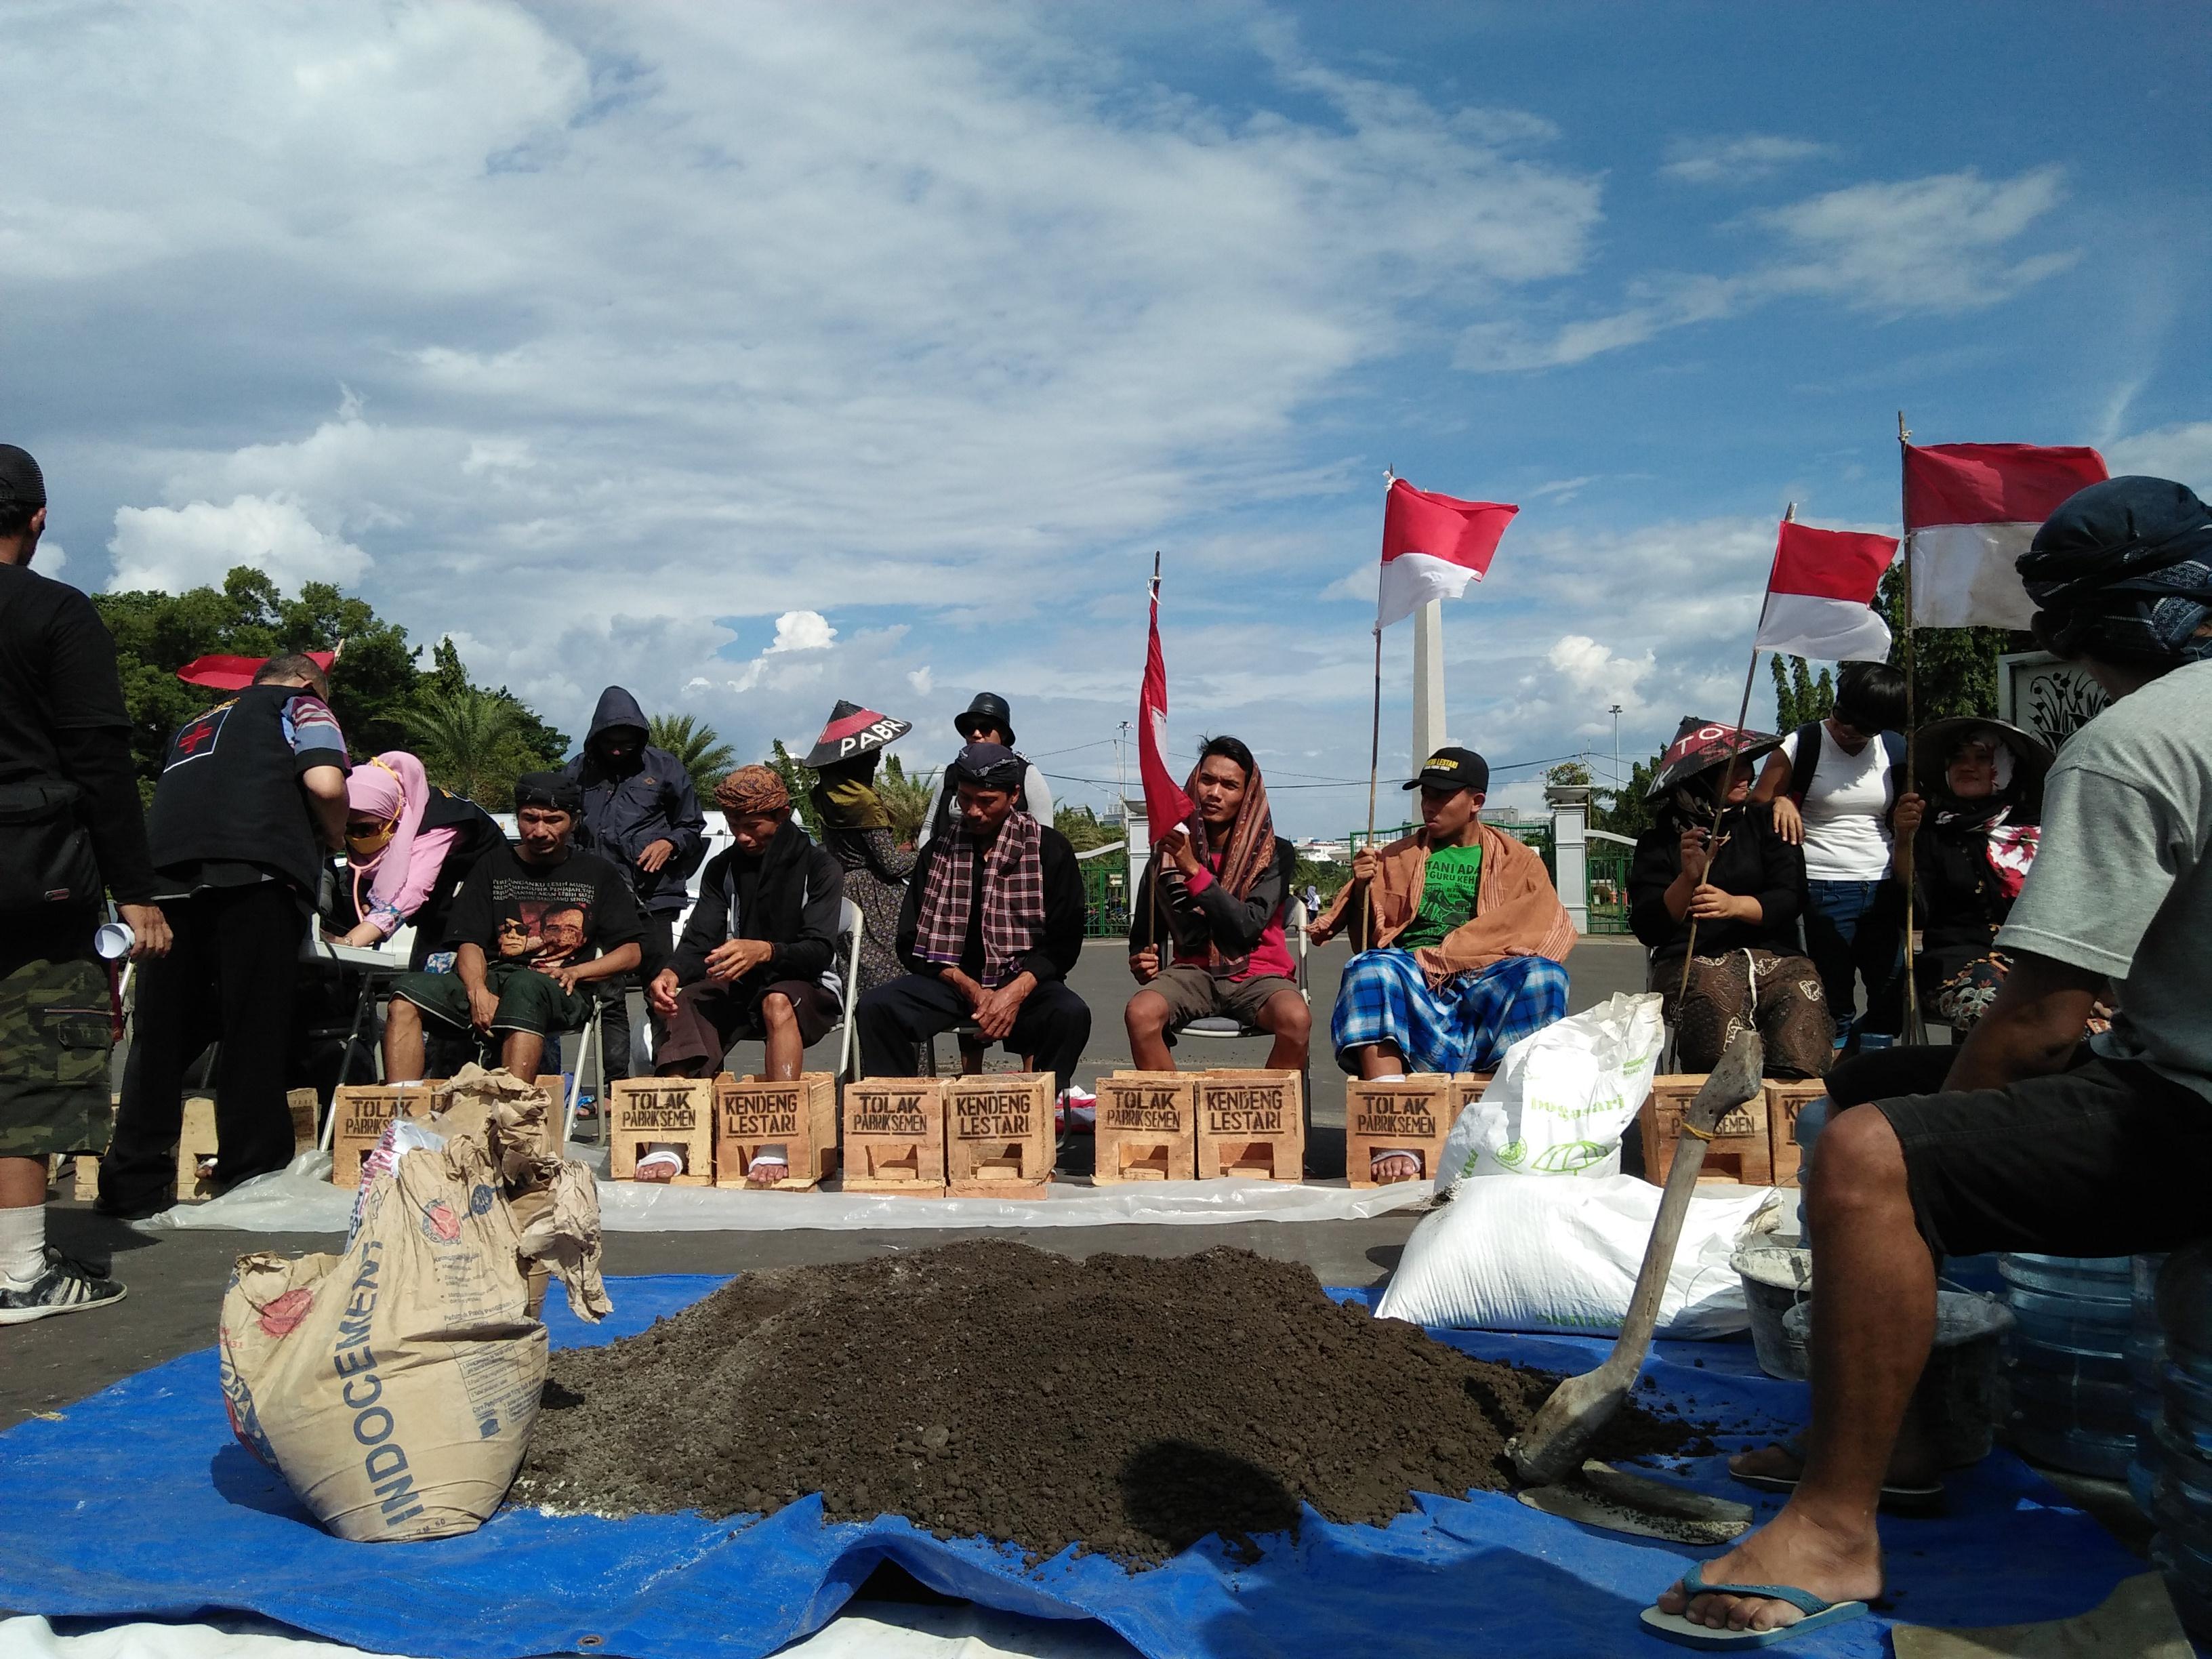 Farmers from central Java cement their feet in protest of a cement factory being established, which 